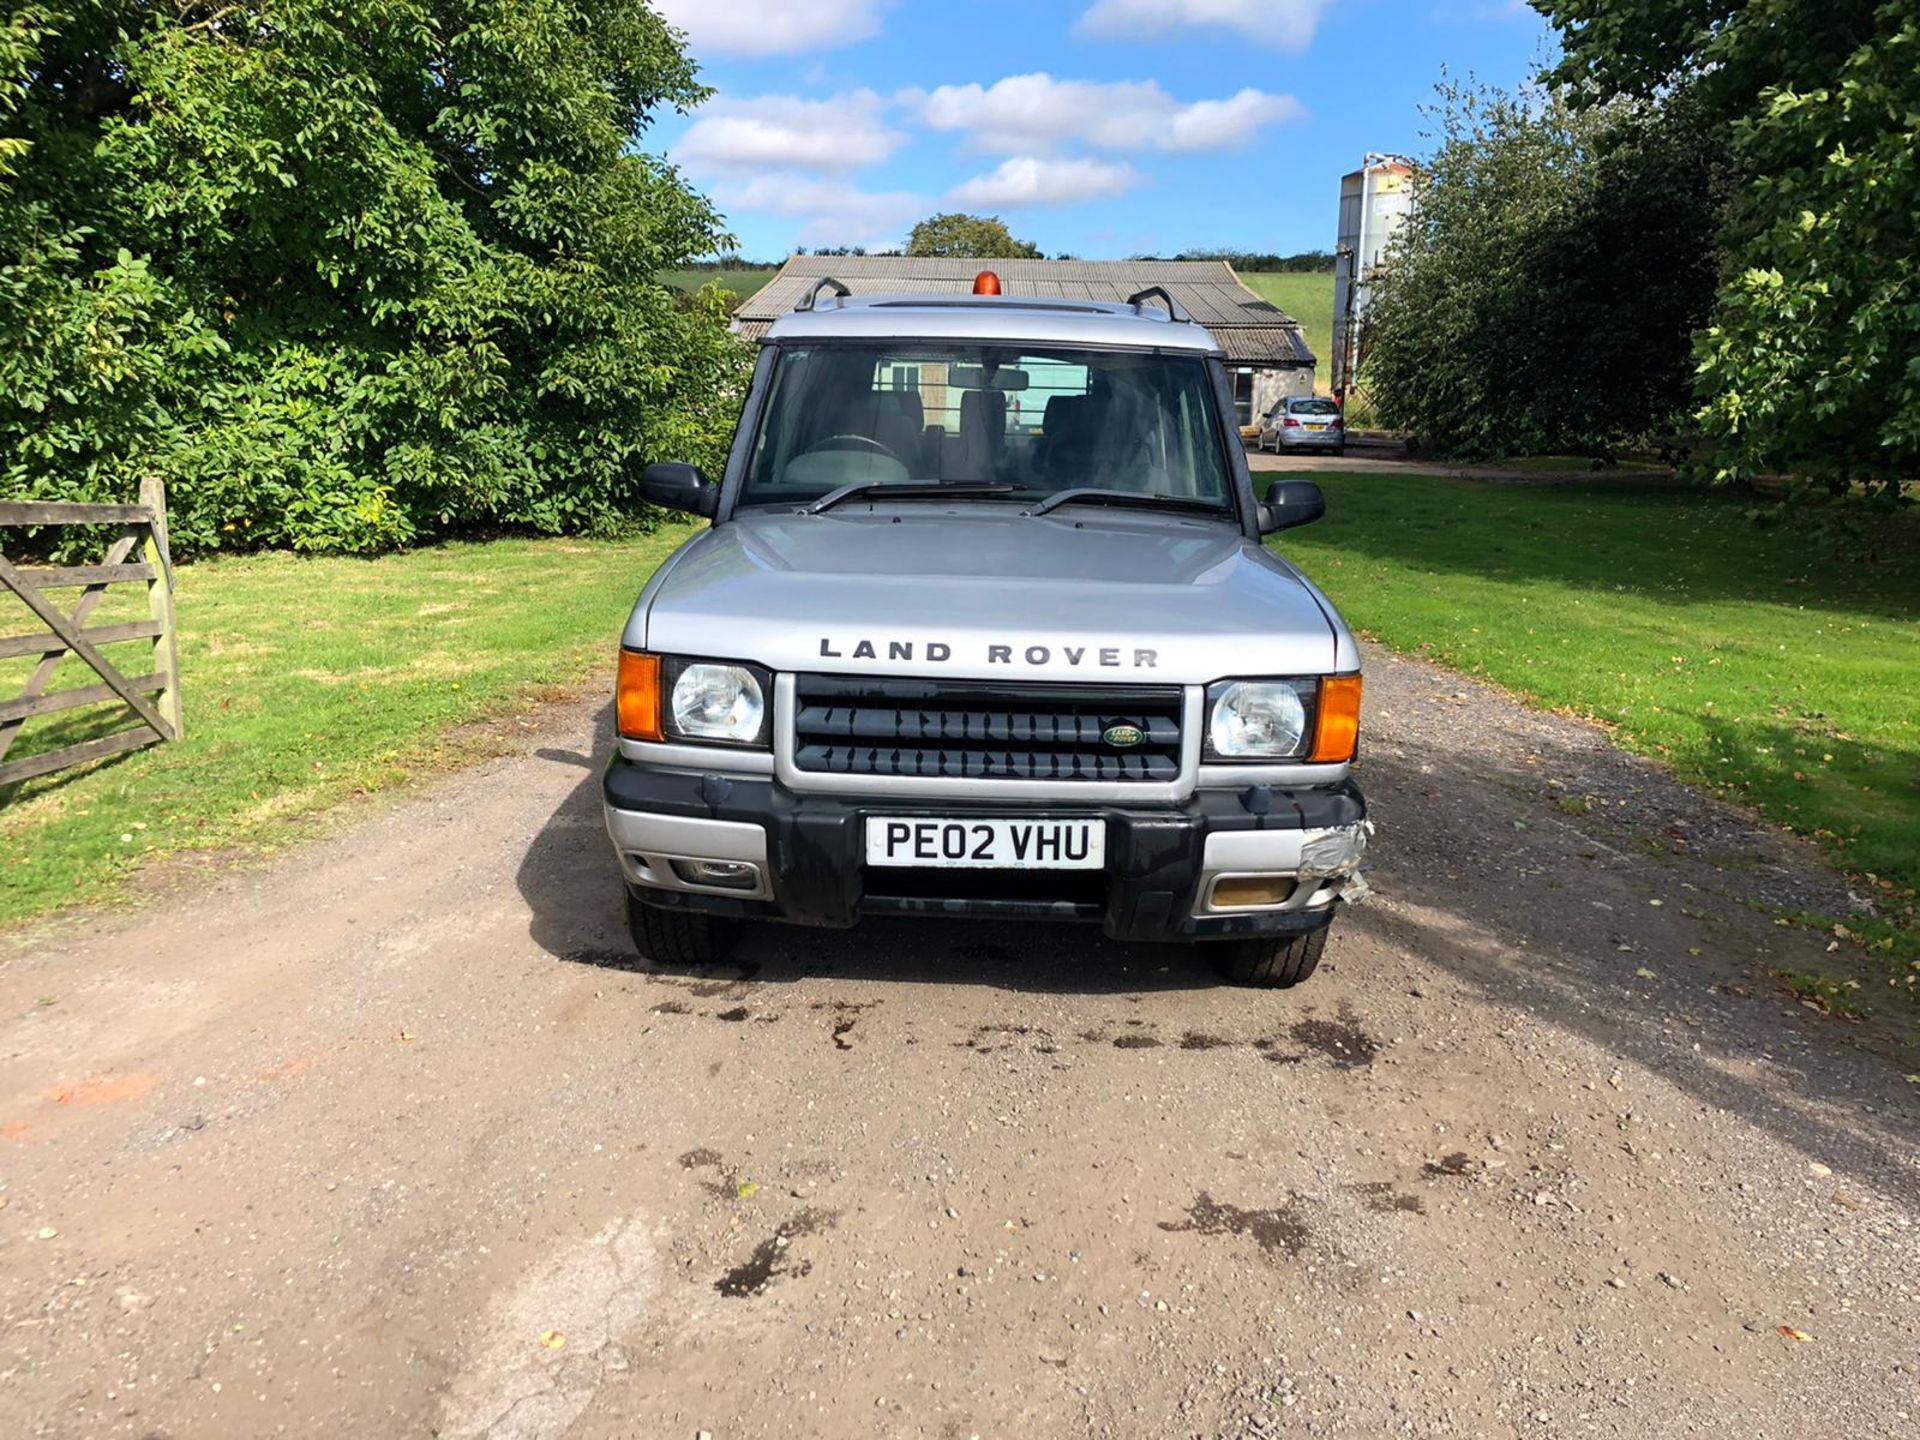 2002 LAND ROVER DISCOVERY TD5 GS SILVER ESTATE, 2.5 DIESEL ENGINE, 201,155 MILES *NO VAT* - Image 2 of 16